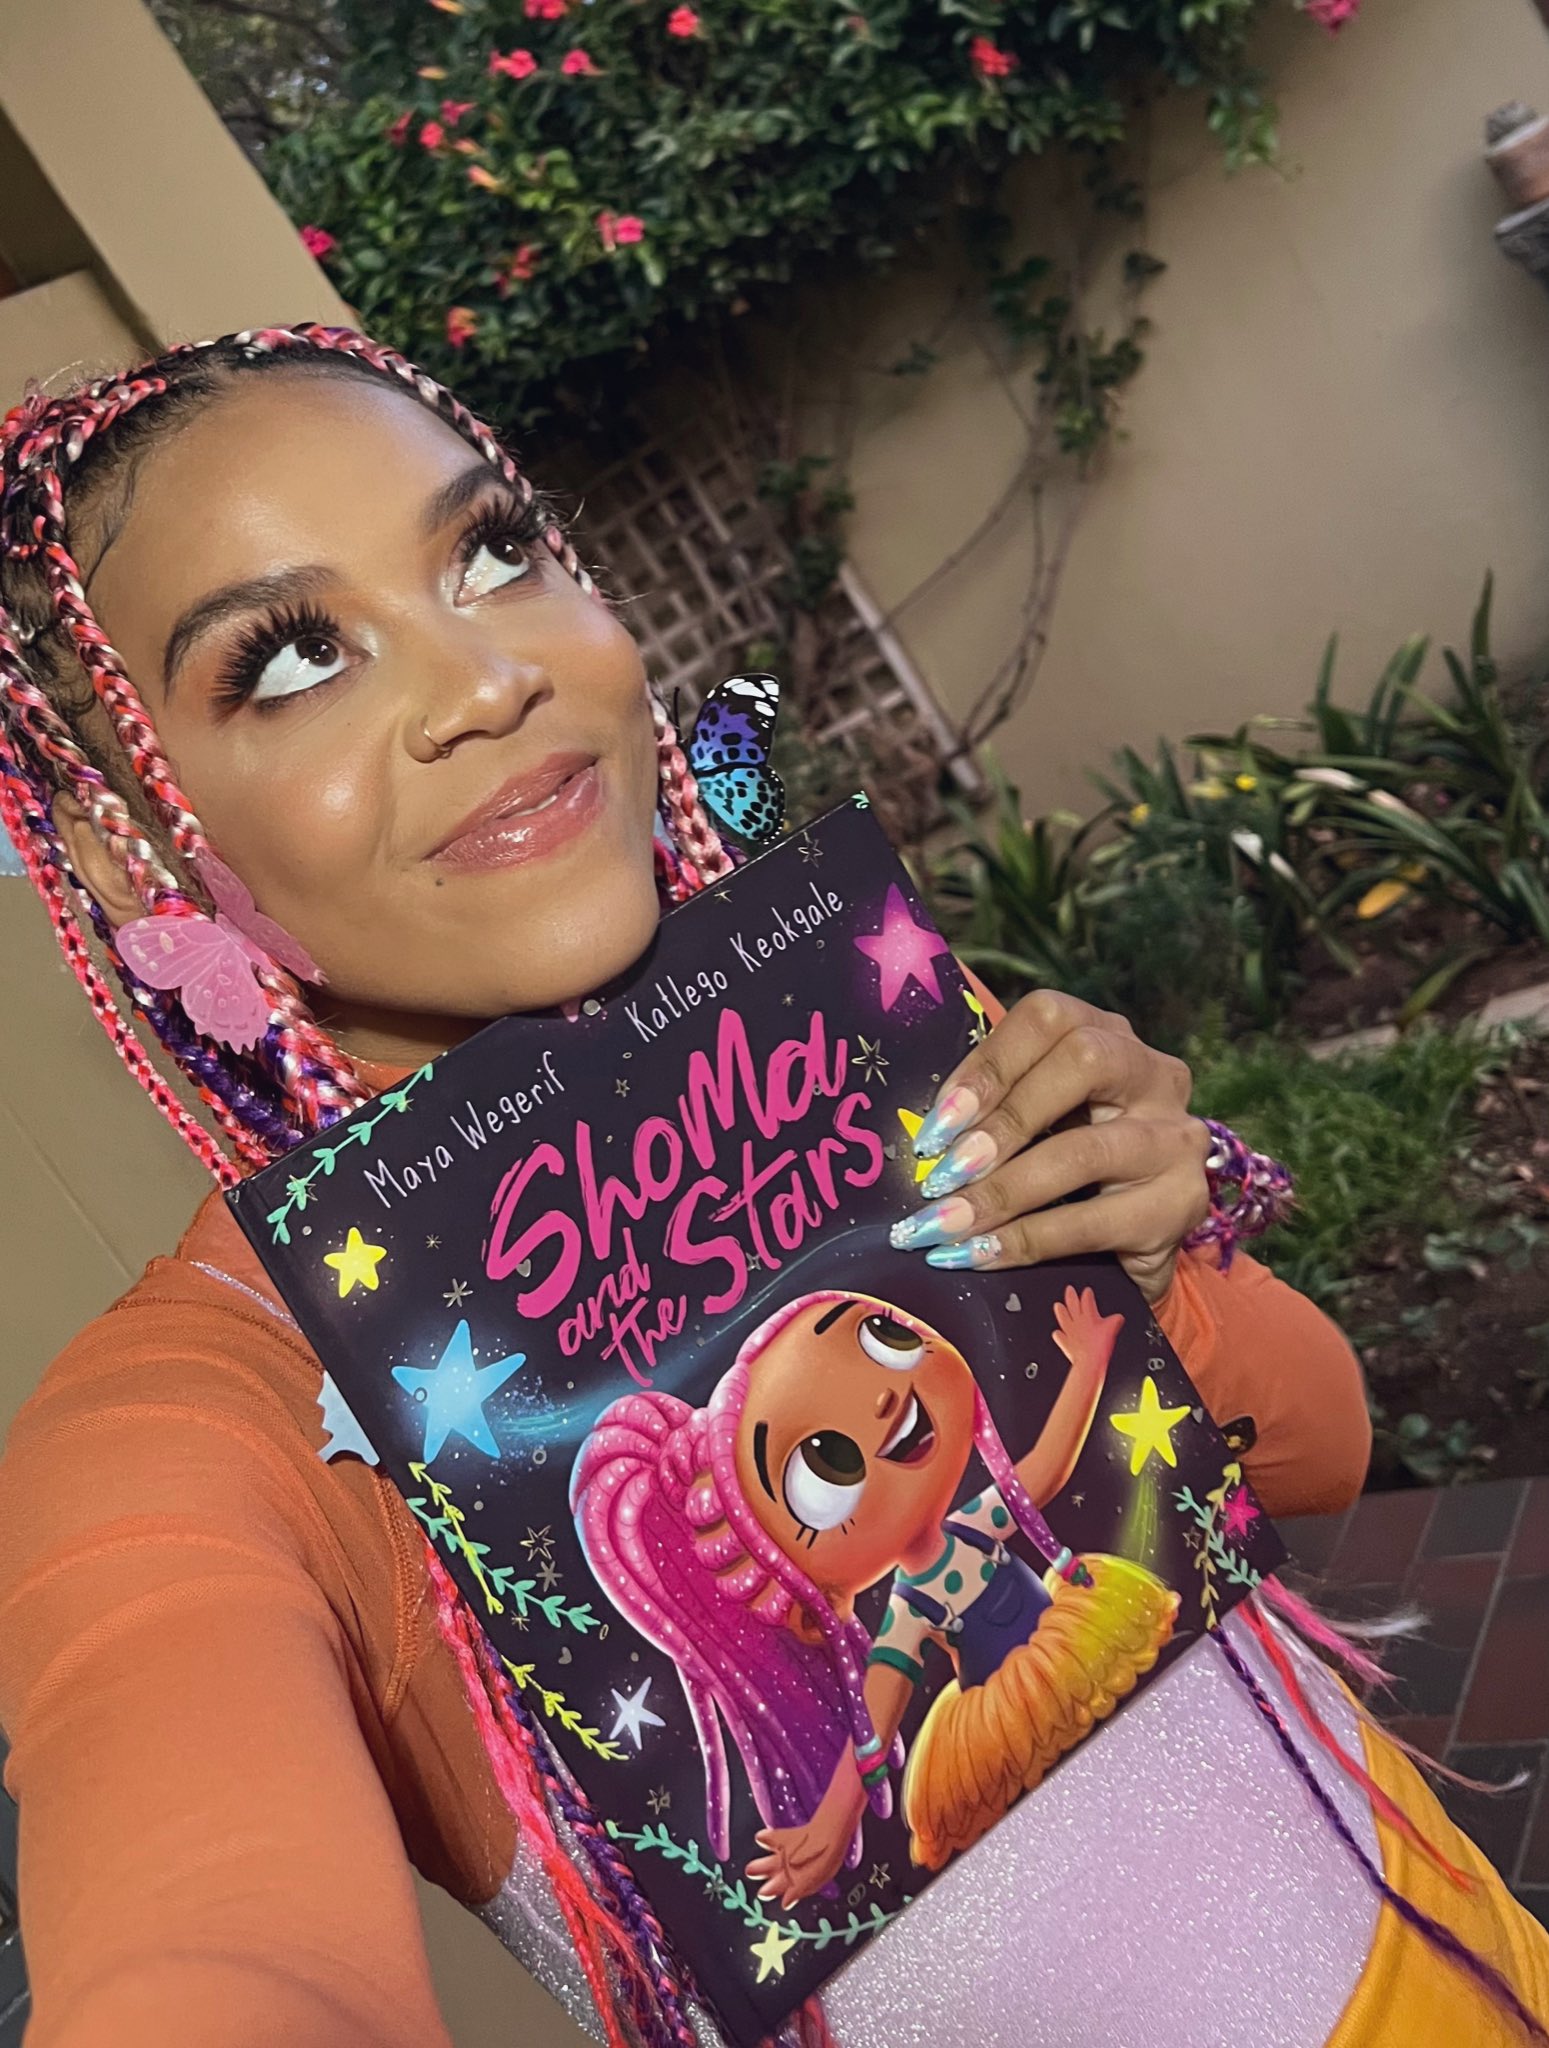 Sho Madjozi's First Children's Book Is A Gratitude Note To Her Little Fans That Features A Heart-warming Story Of Adventure, Community & Friendship